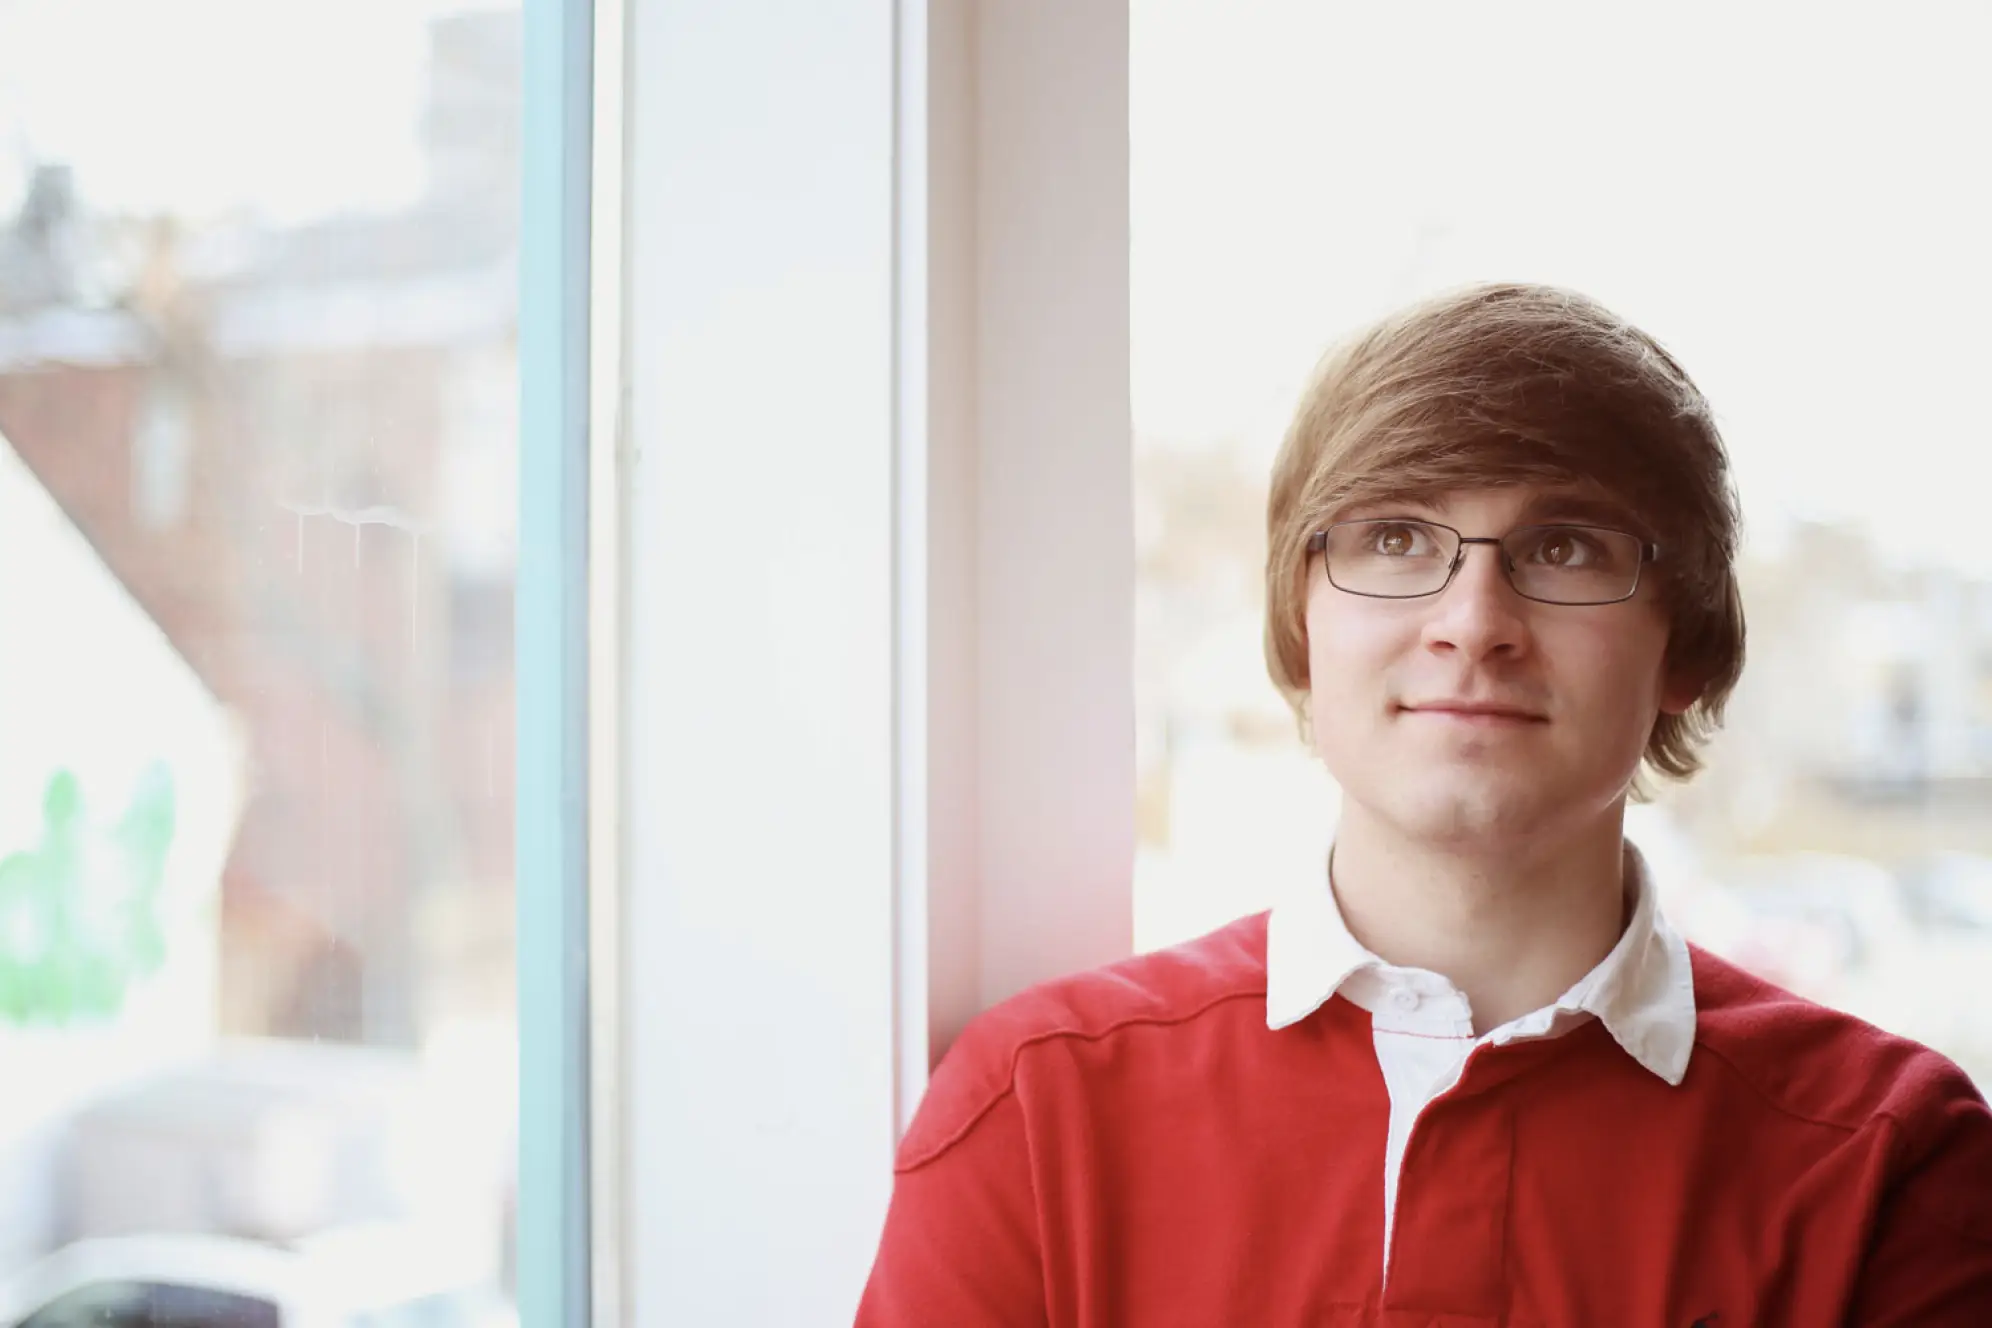 Young man with brown and glasses looking out window and wearing a red shirt